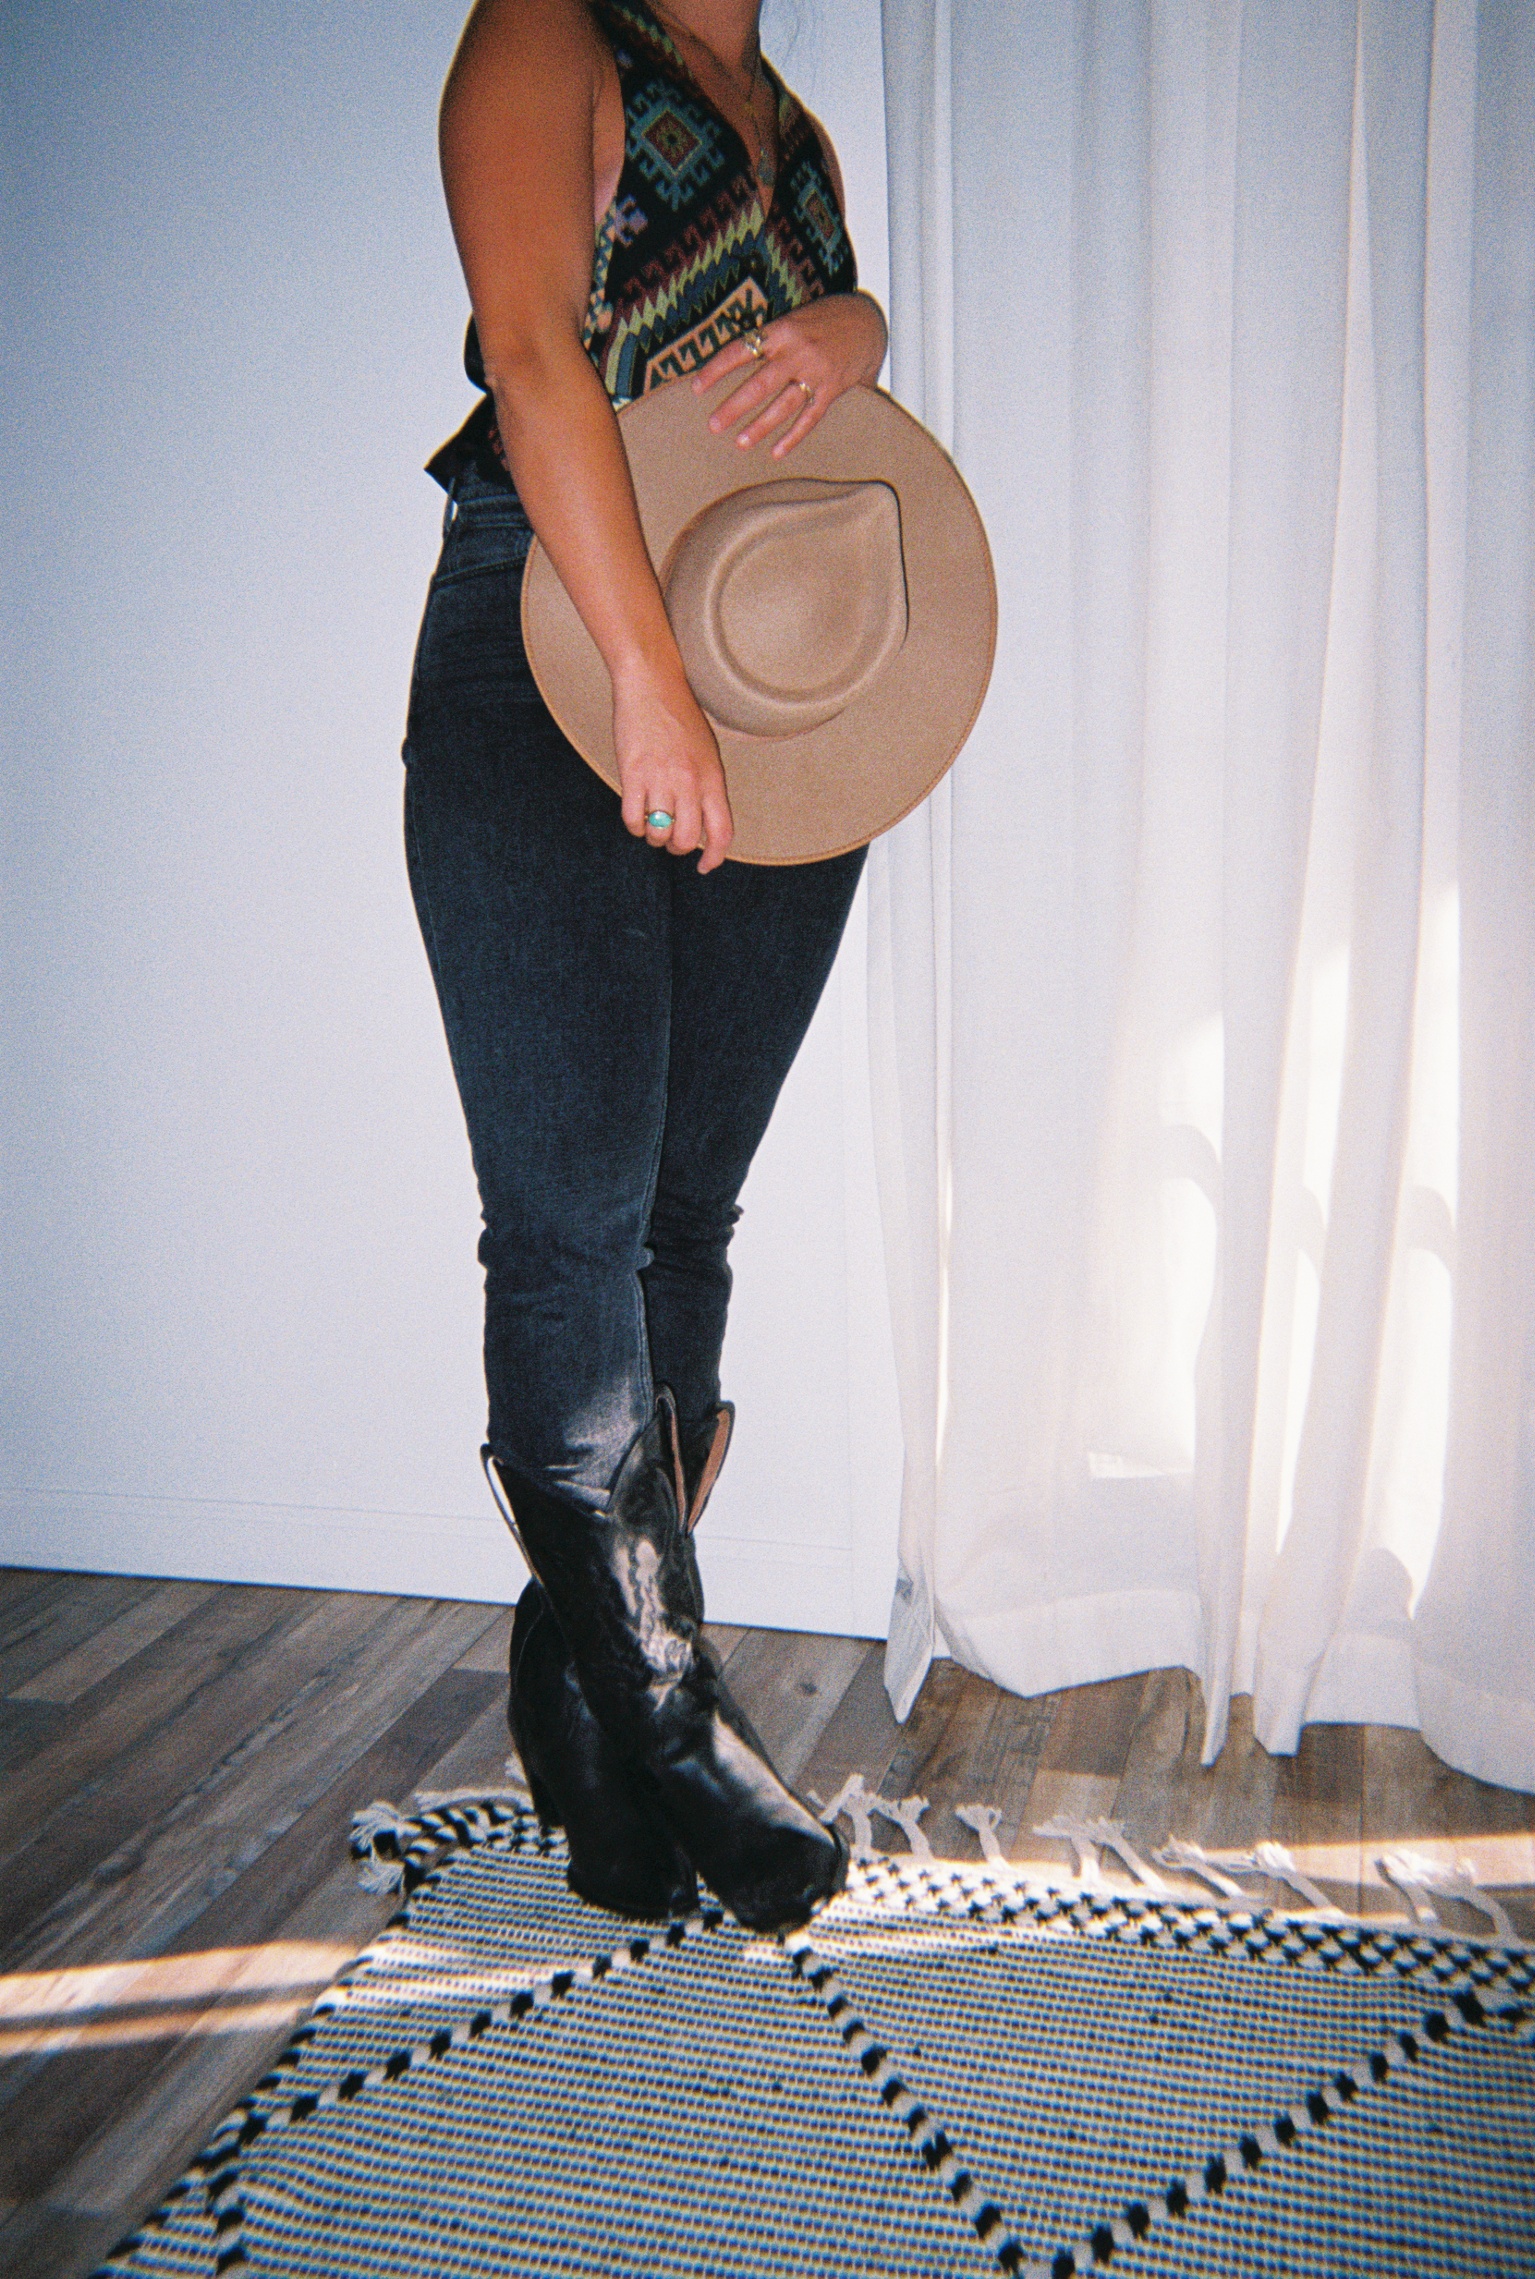 A writer who specializes in evergreen copywriting holds a cowboy hat up against an all black outfit.